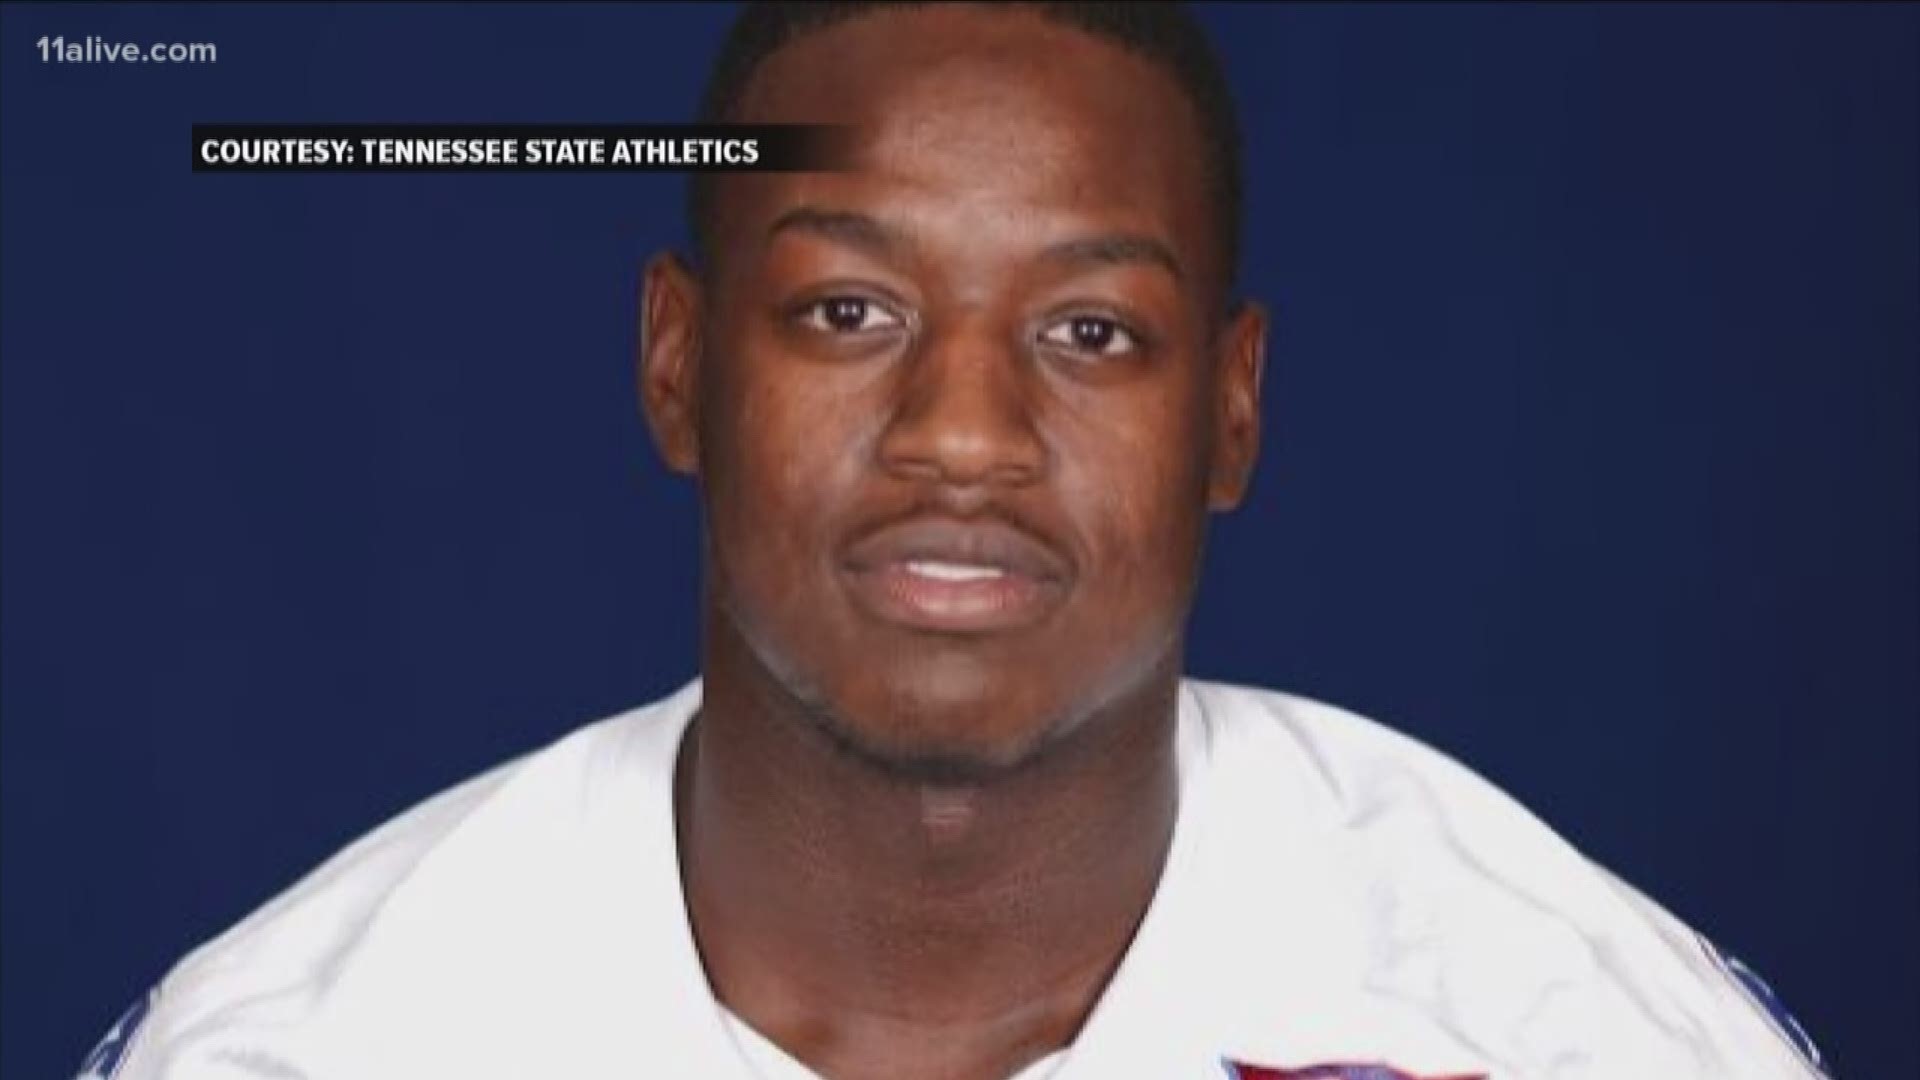 Whatever happened to the Tennessee State University football player that suffered a massive brain injury in the fall. 11Alive has kept up with his challenging recovery process.